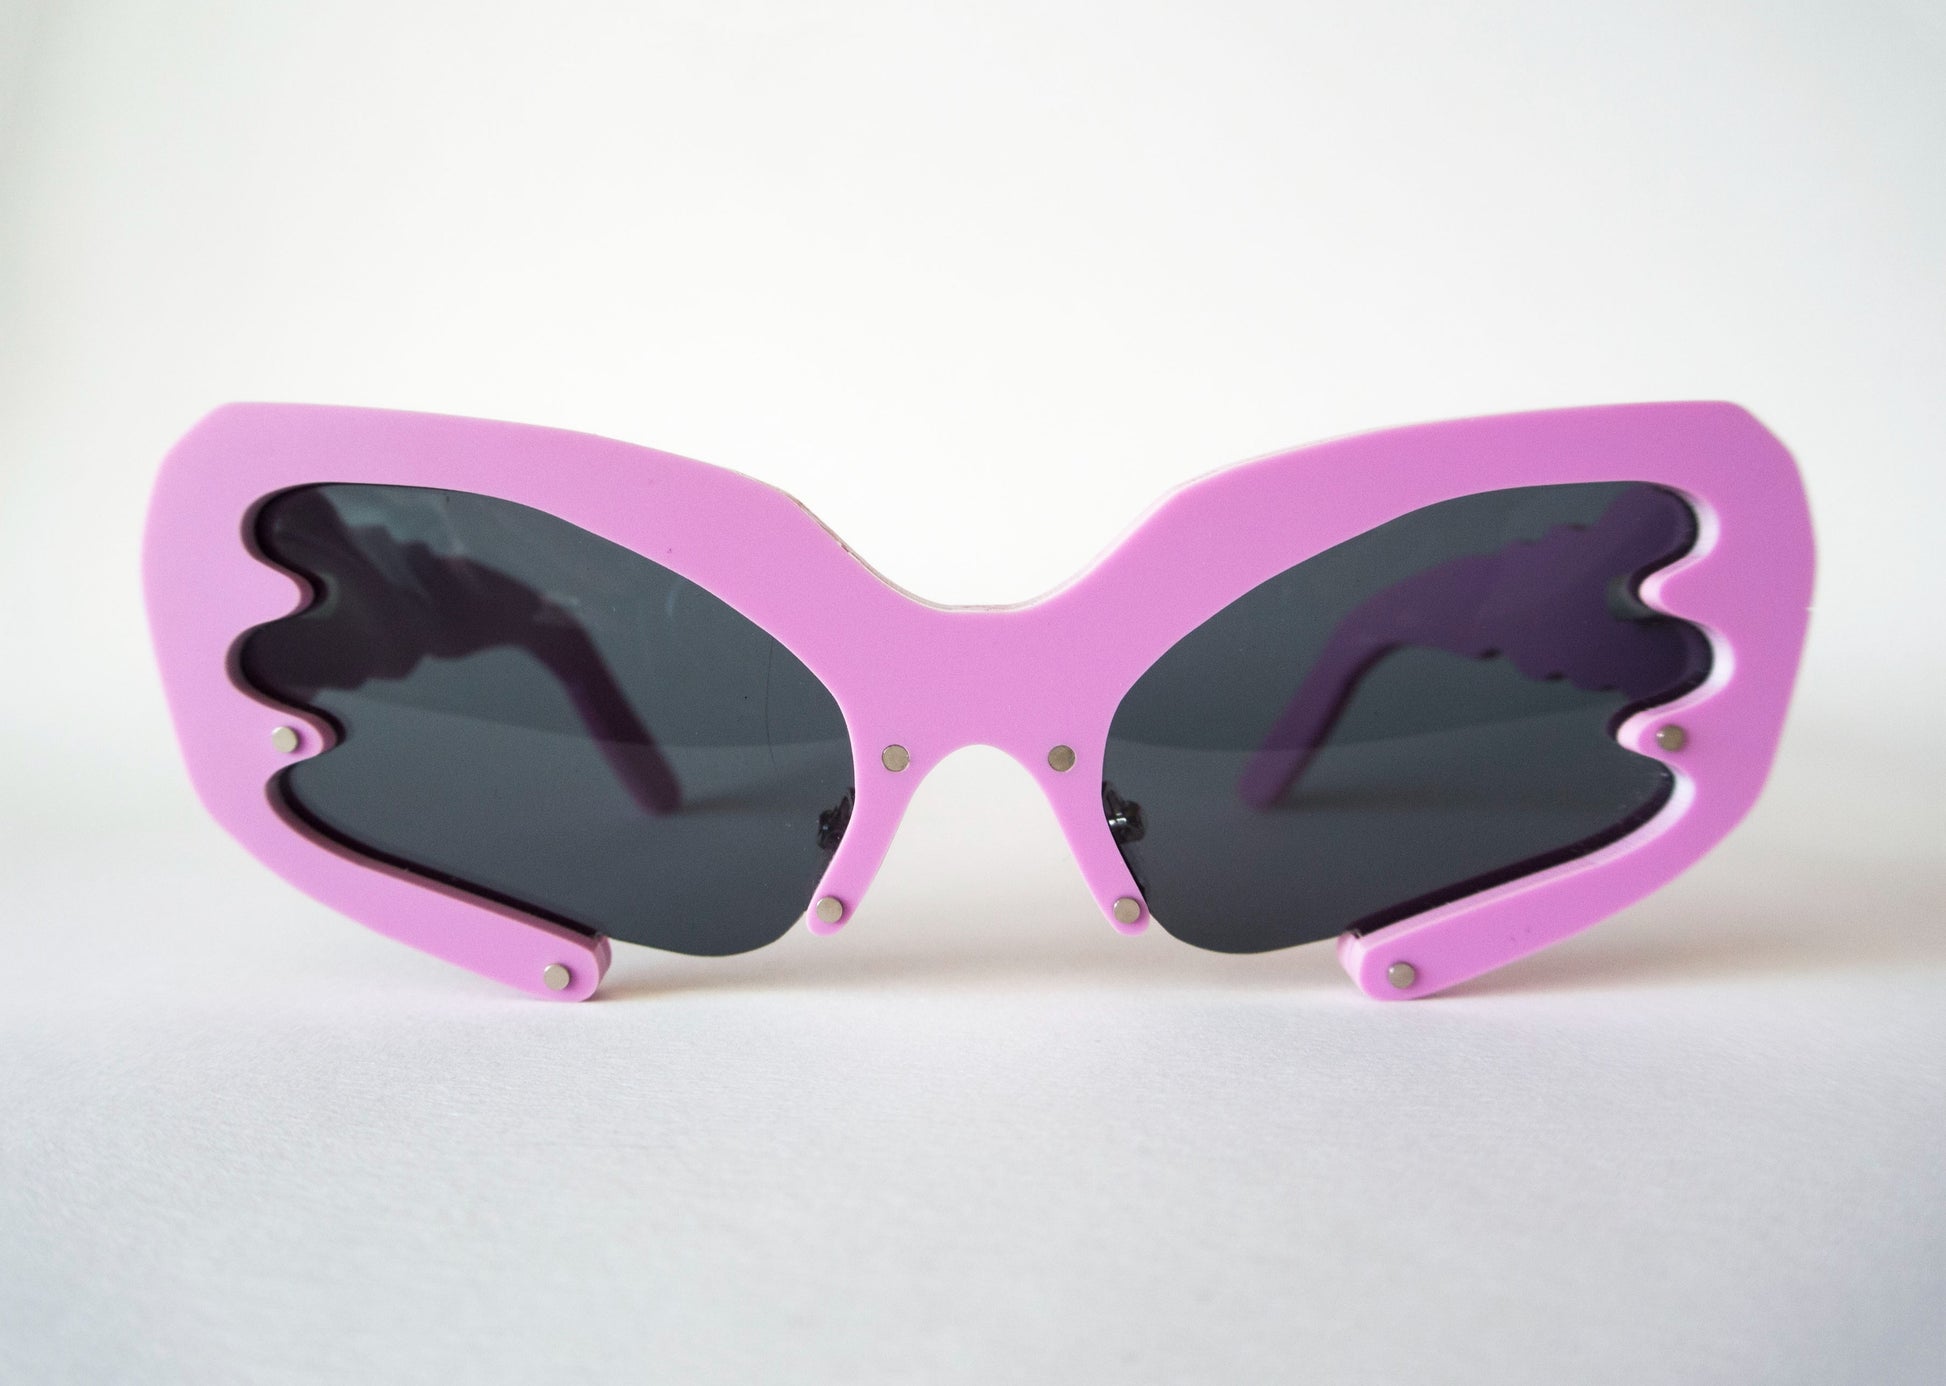 pink buggy sunglasses with black lenses by animalhair